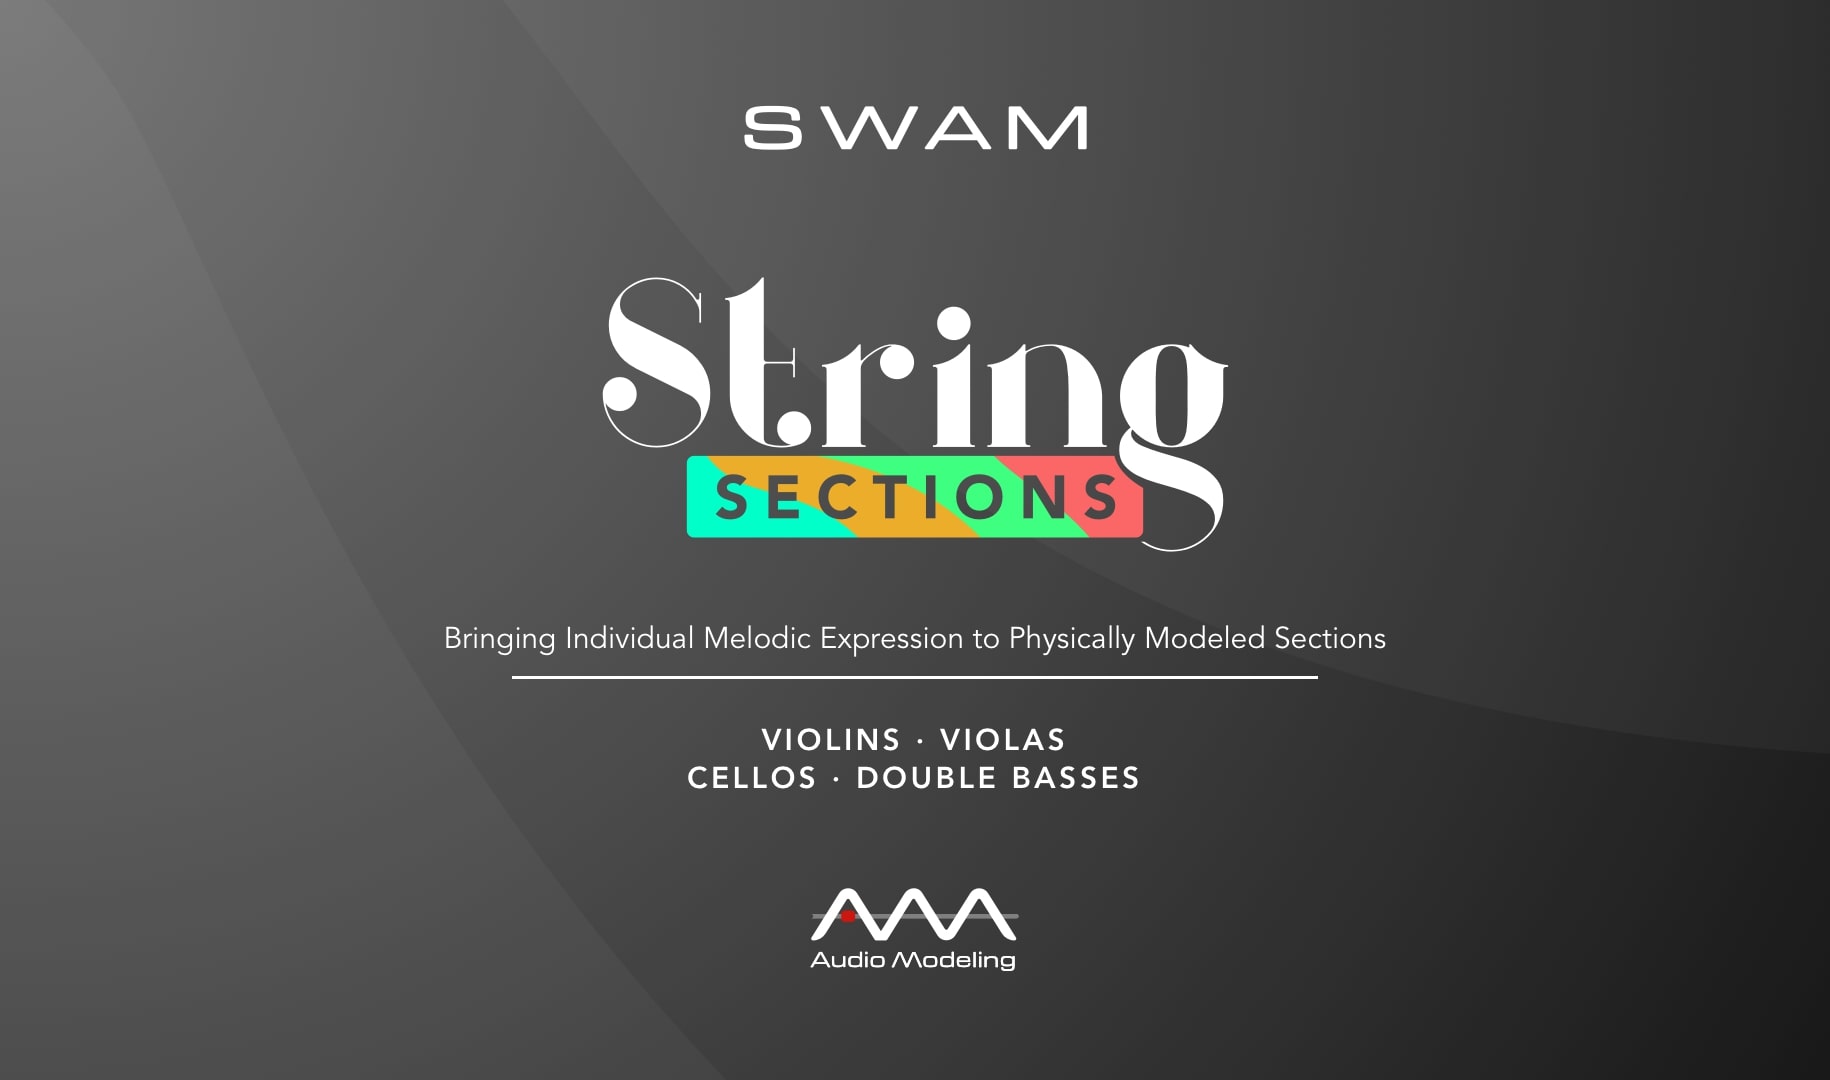 SWAM String Sections